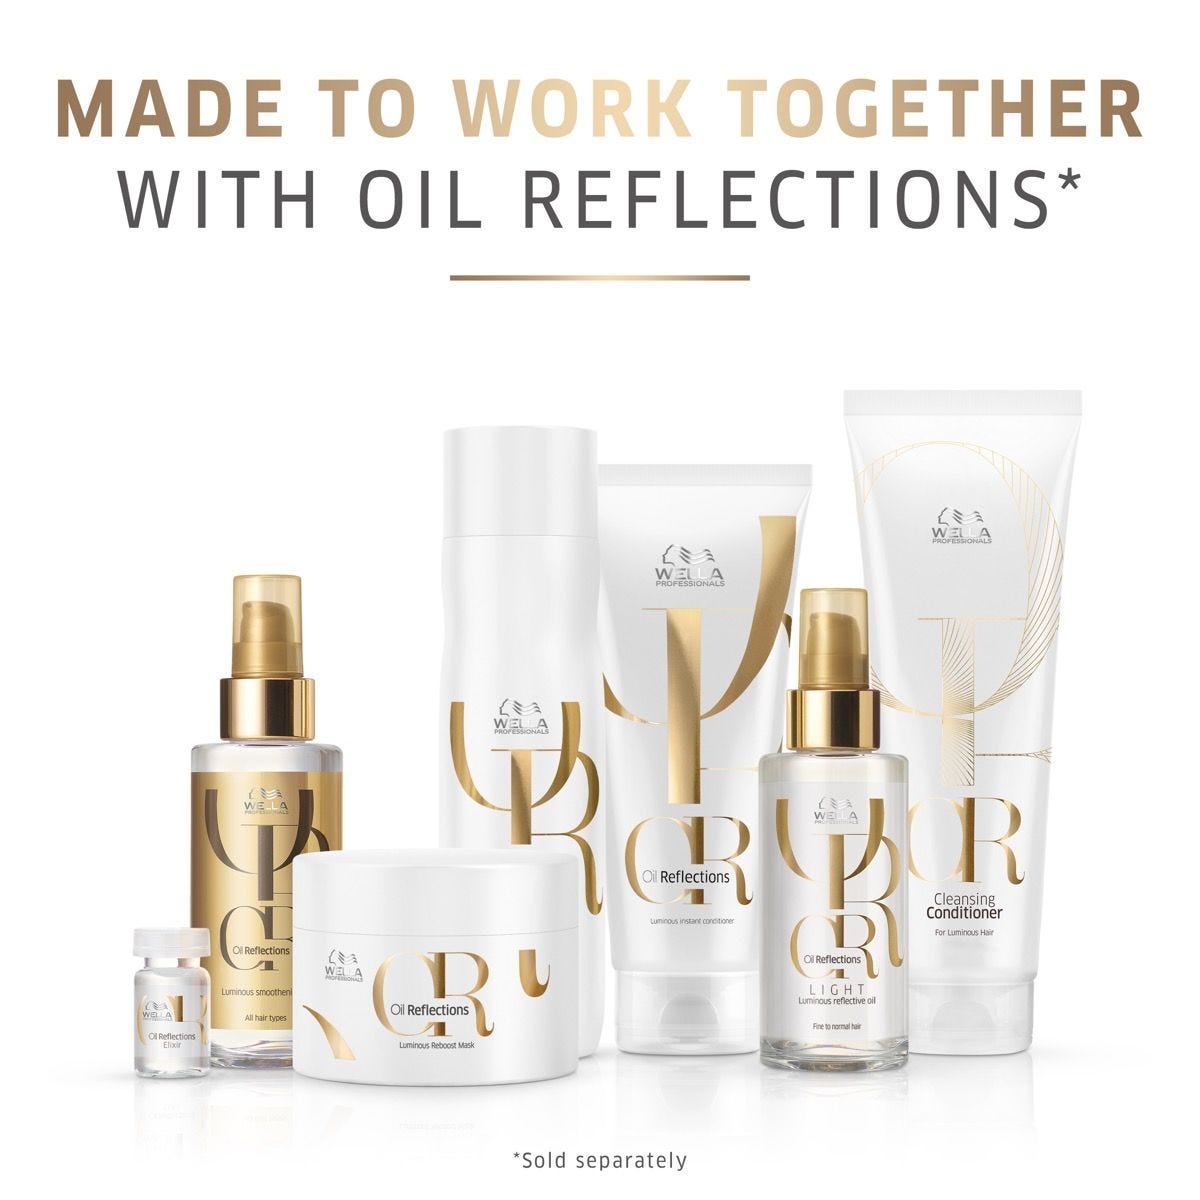 Oil Reflections Mask 150ml